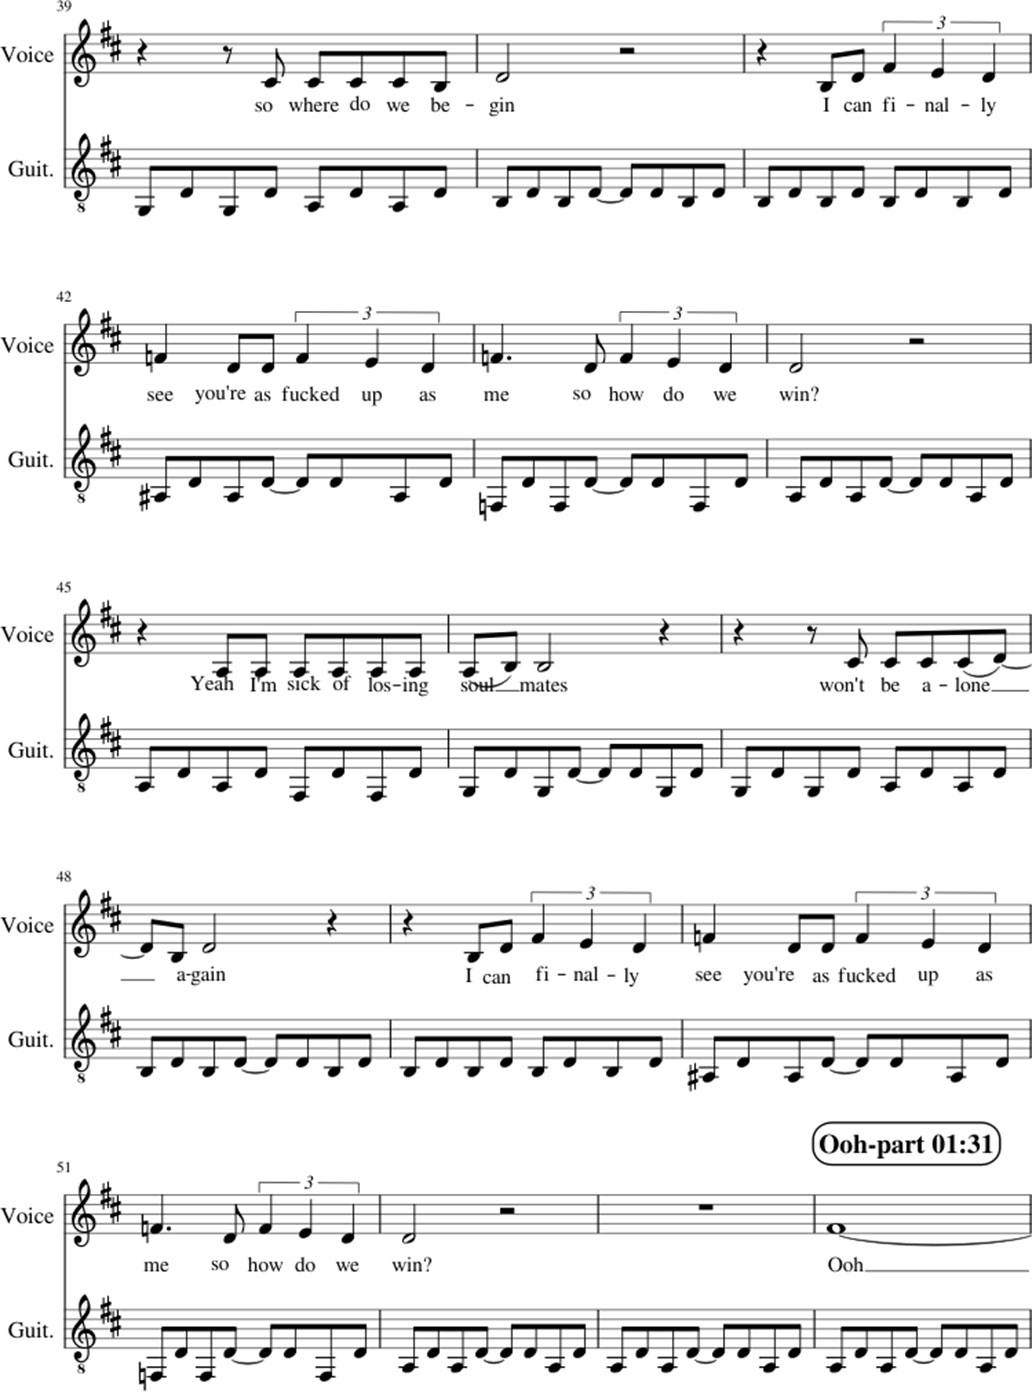 Sick of losing soulmate sheet music notes 3